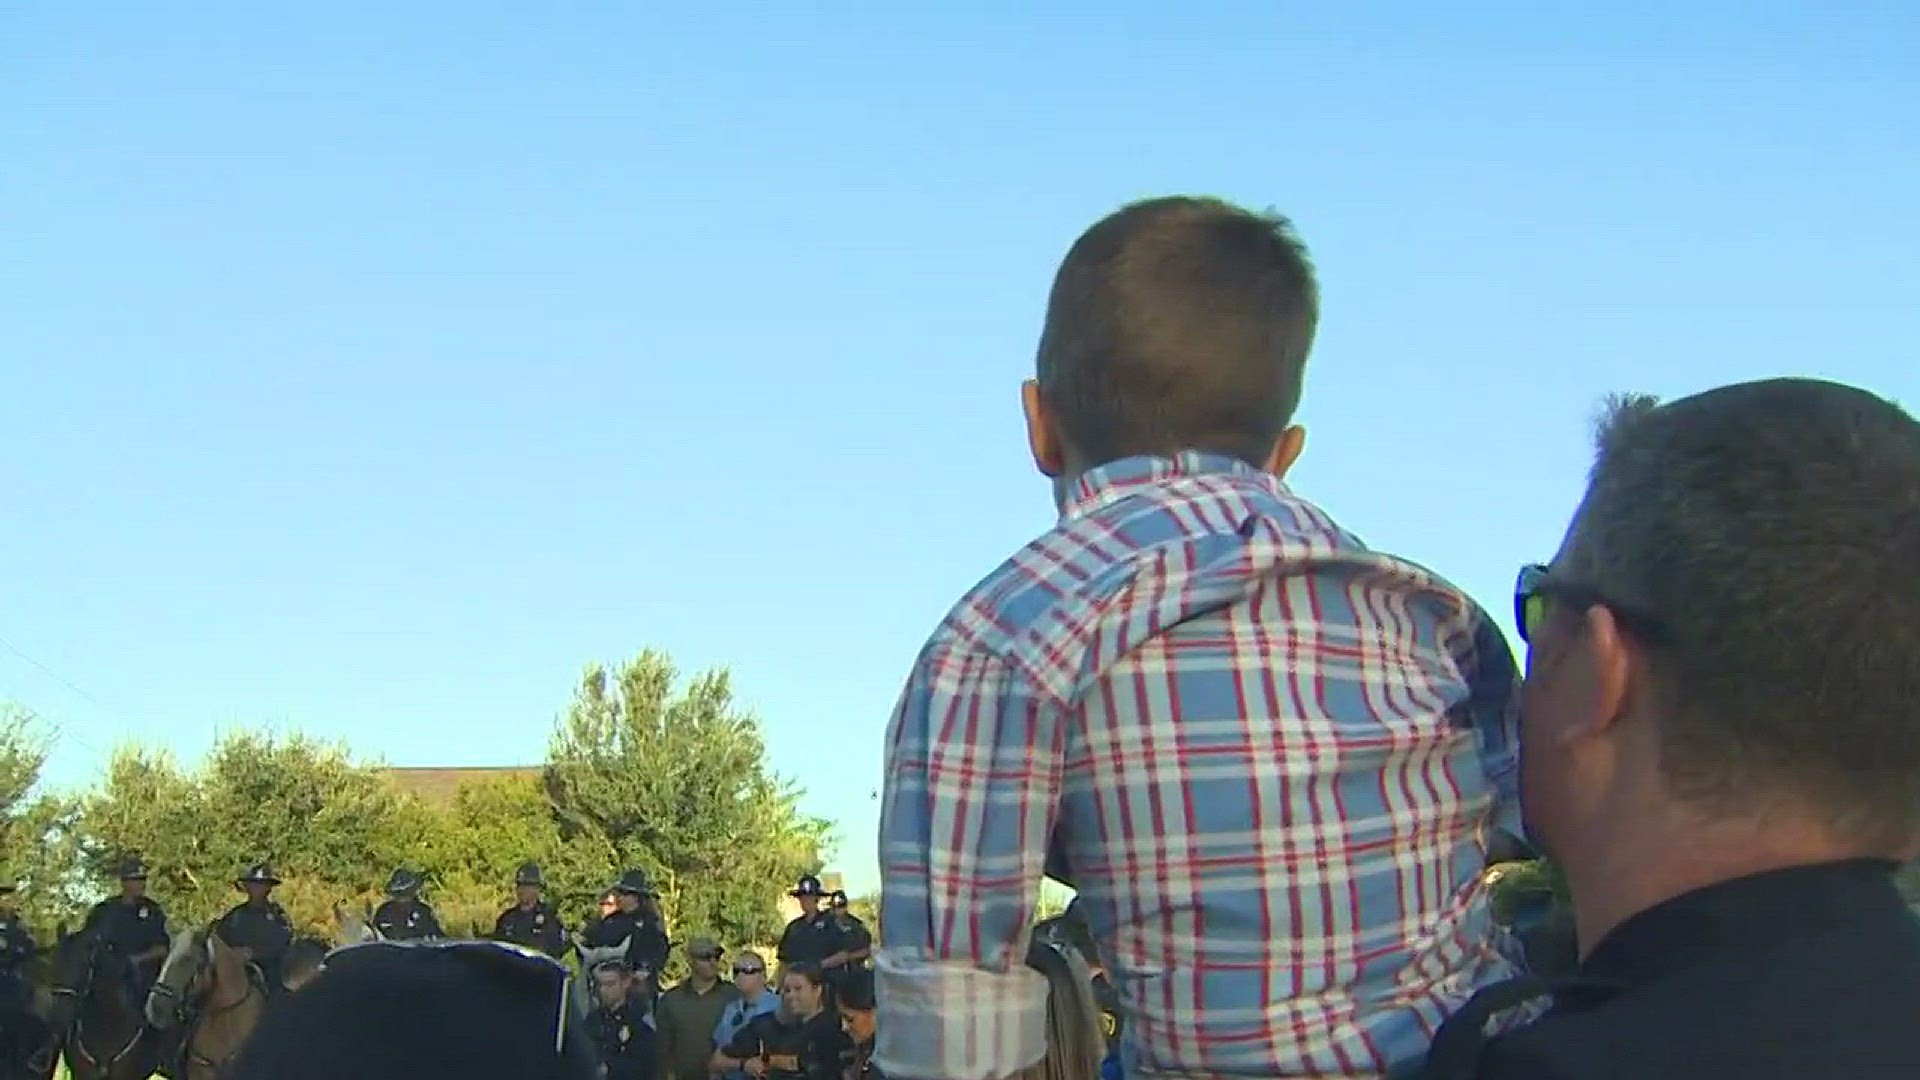 The son of a fallen HPD officer was escorted to his first day of kindergarten by hundreds of police officers.